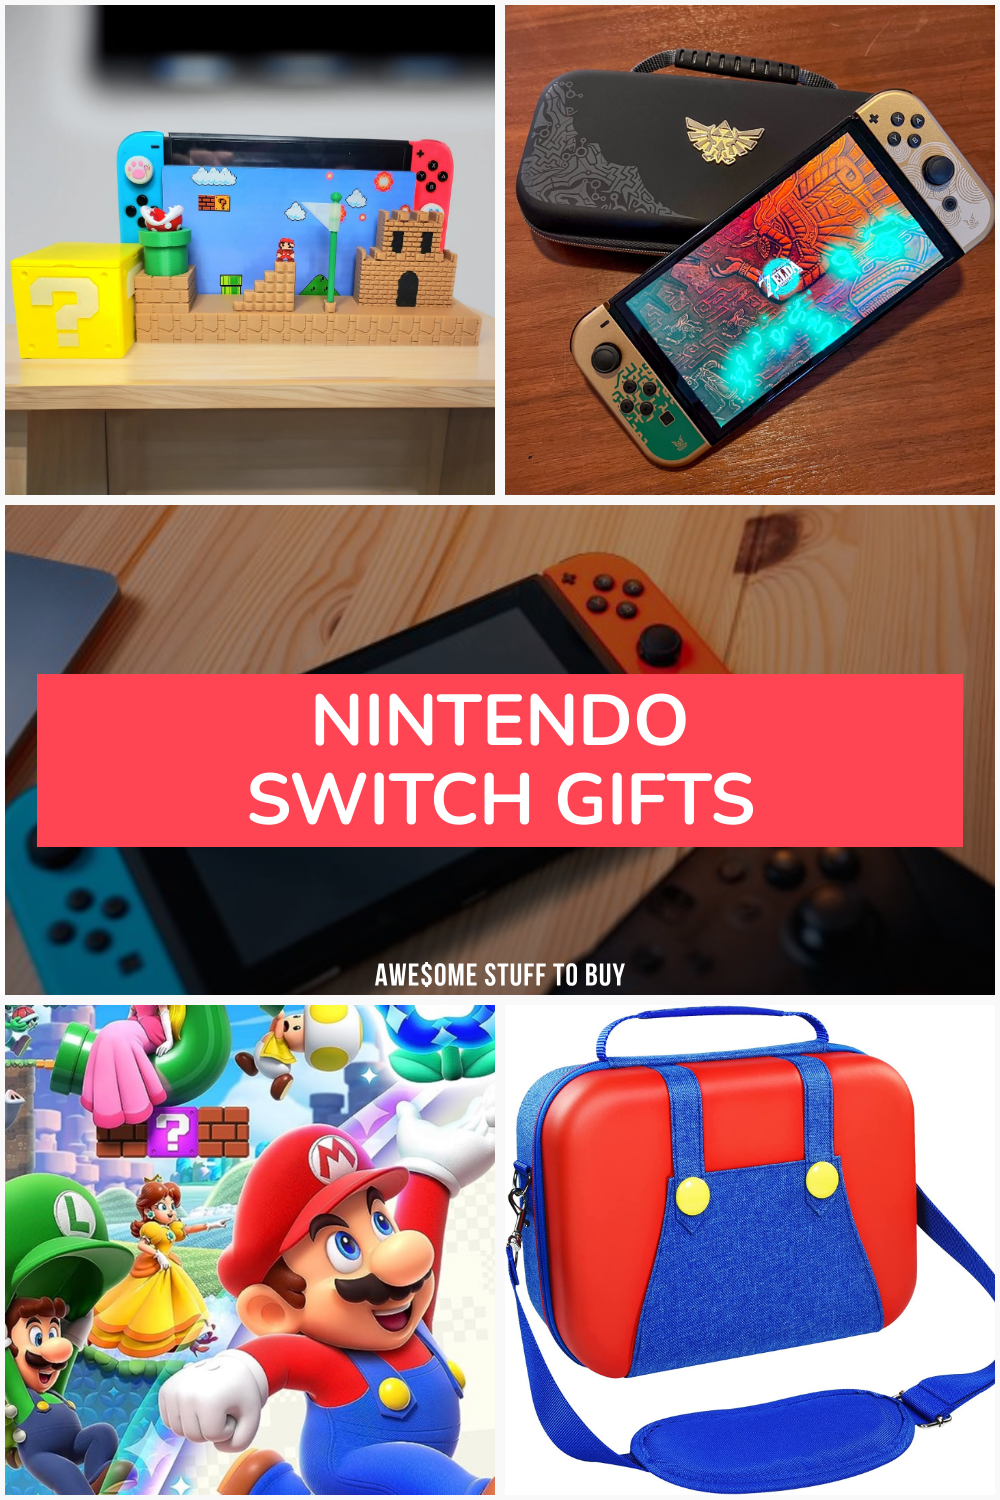 Nintendo Switch Gifts // Awesome Stuff to Buy